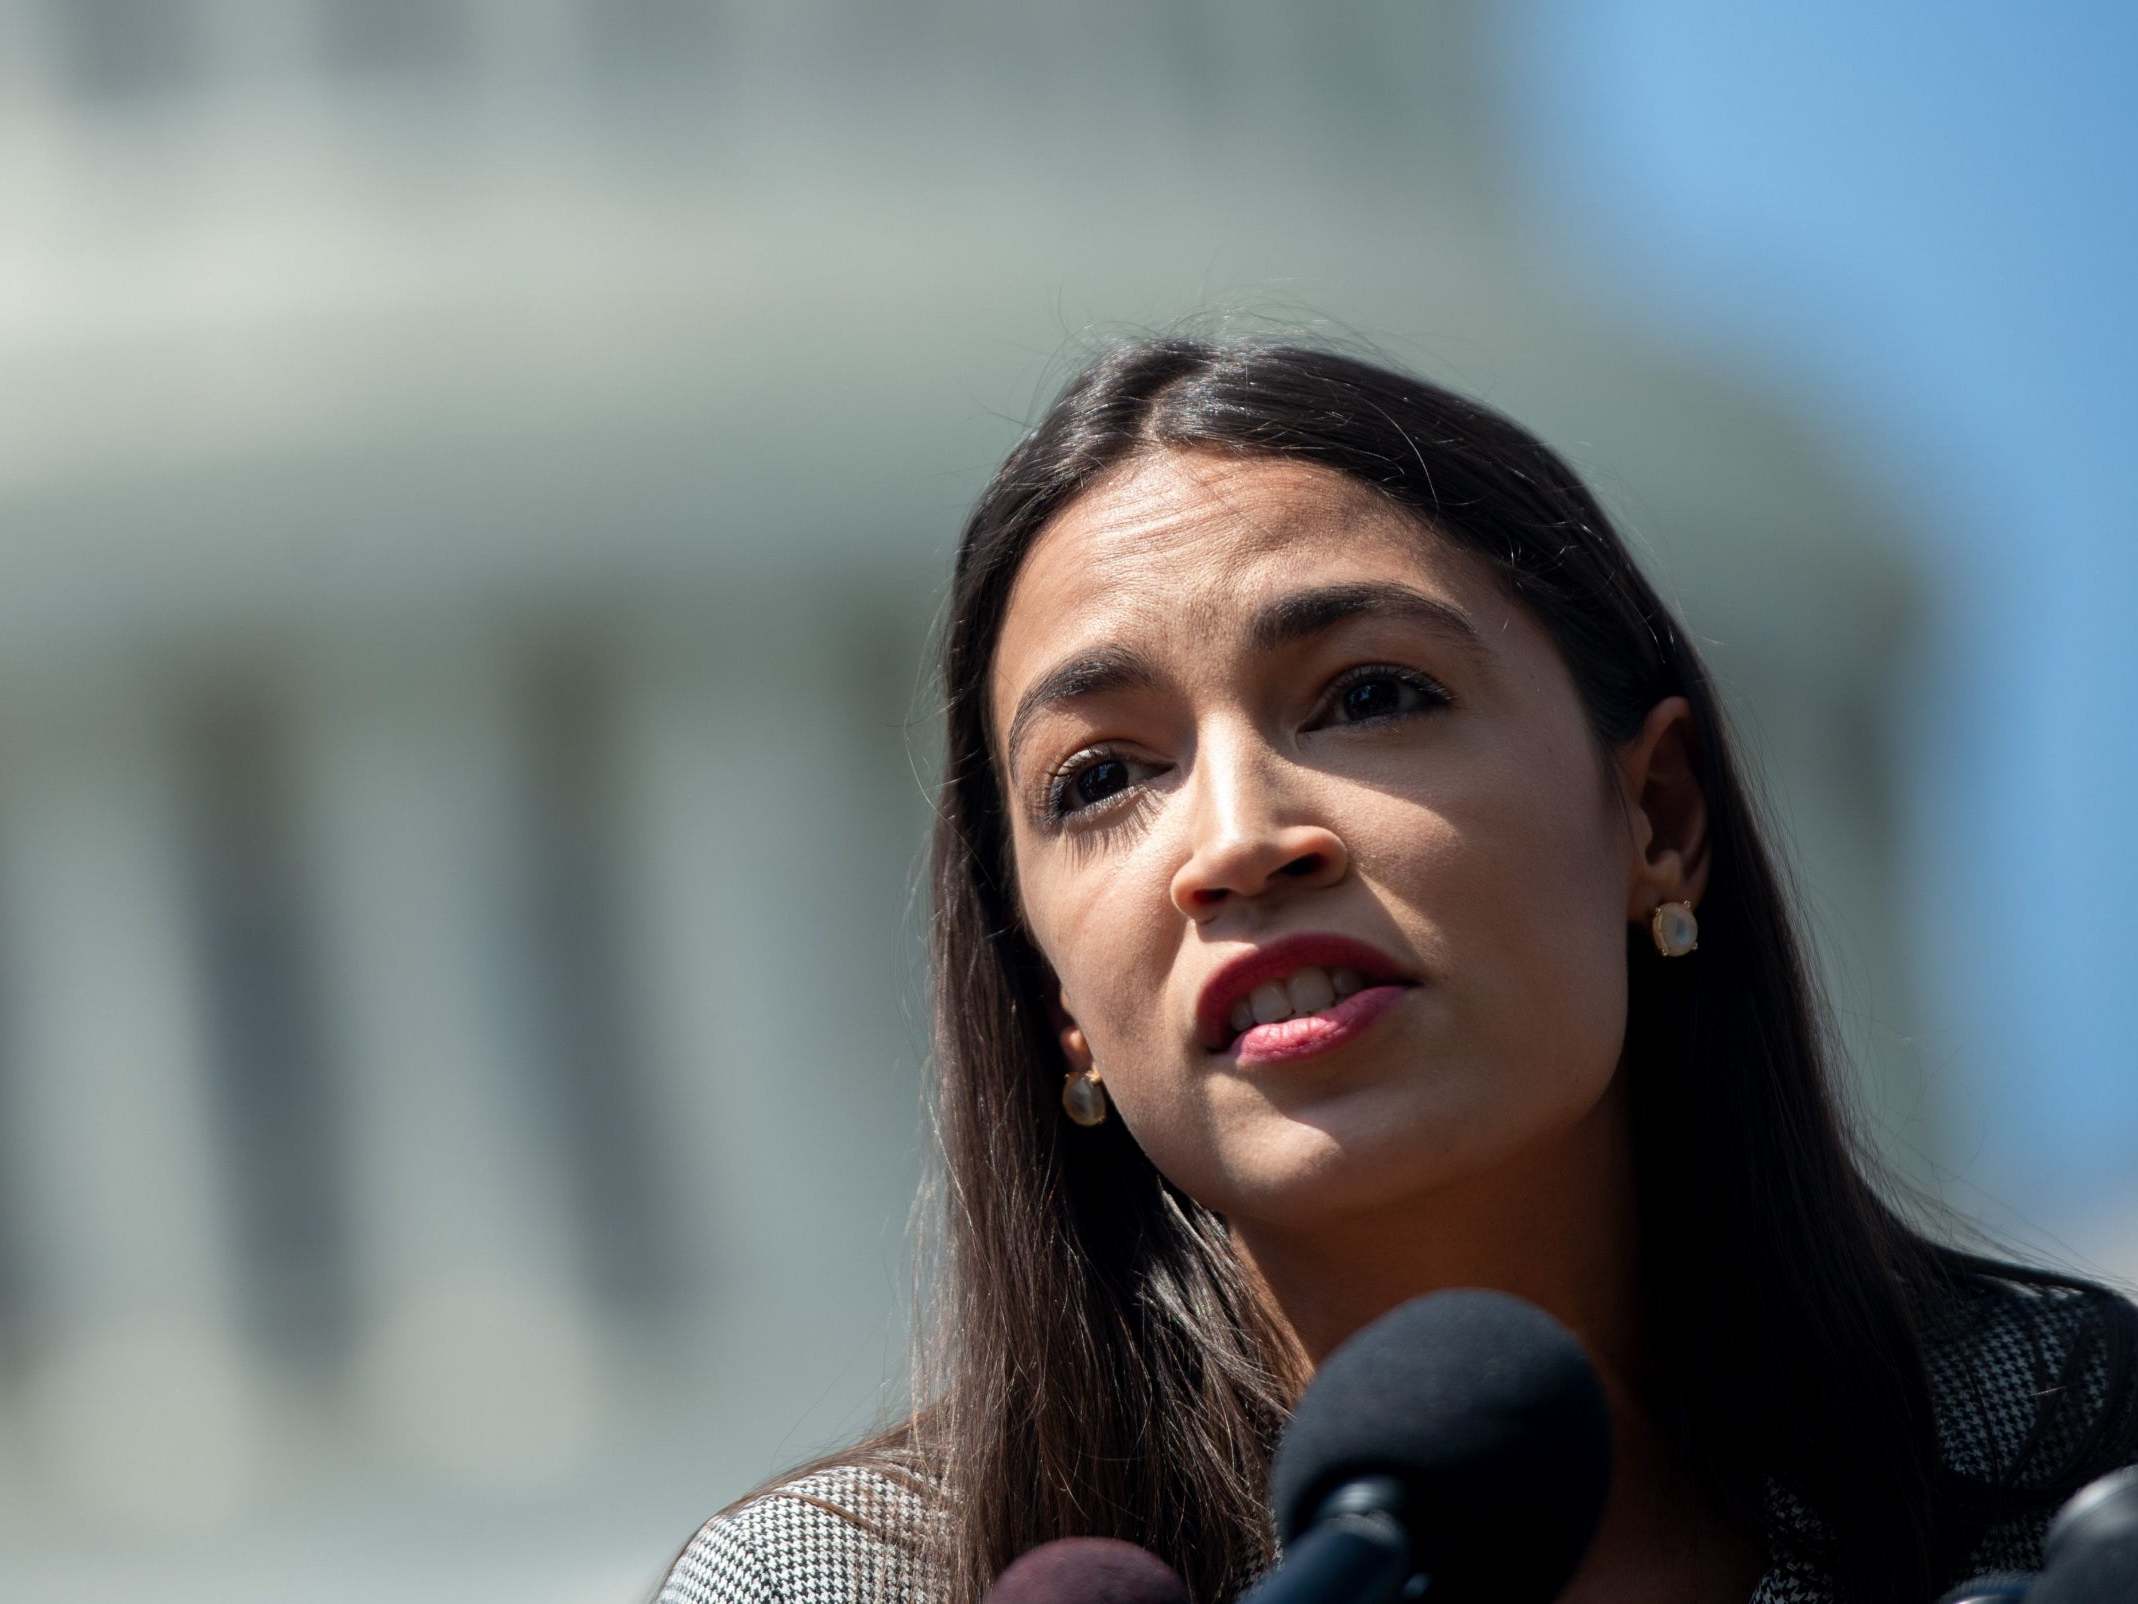 AOC slams &apos;shrieking Republicans&apos; after comparing migrant detention centers to concentration camps